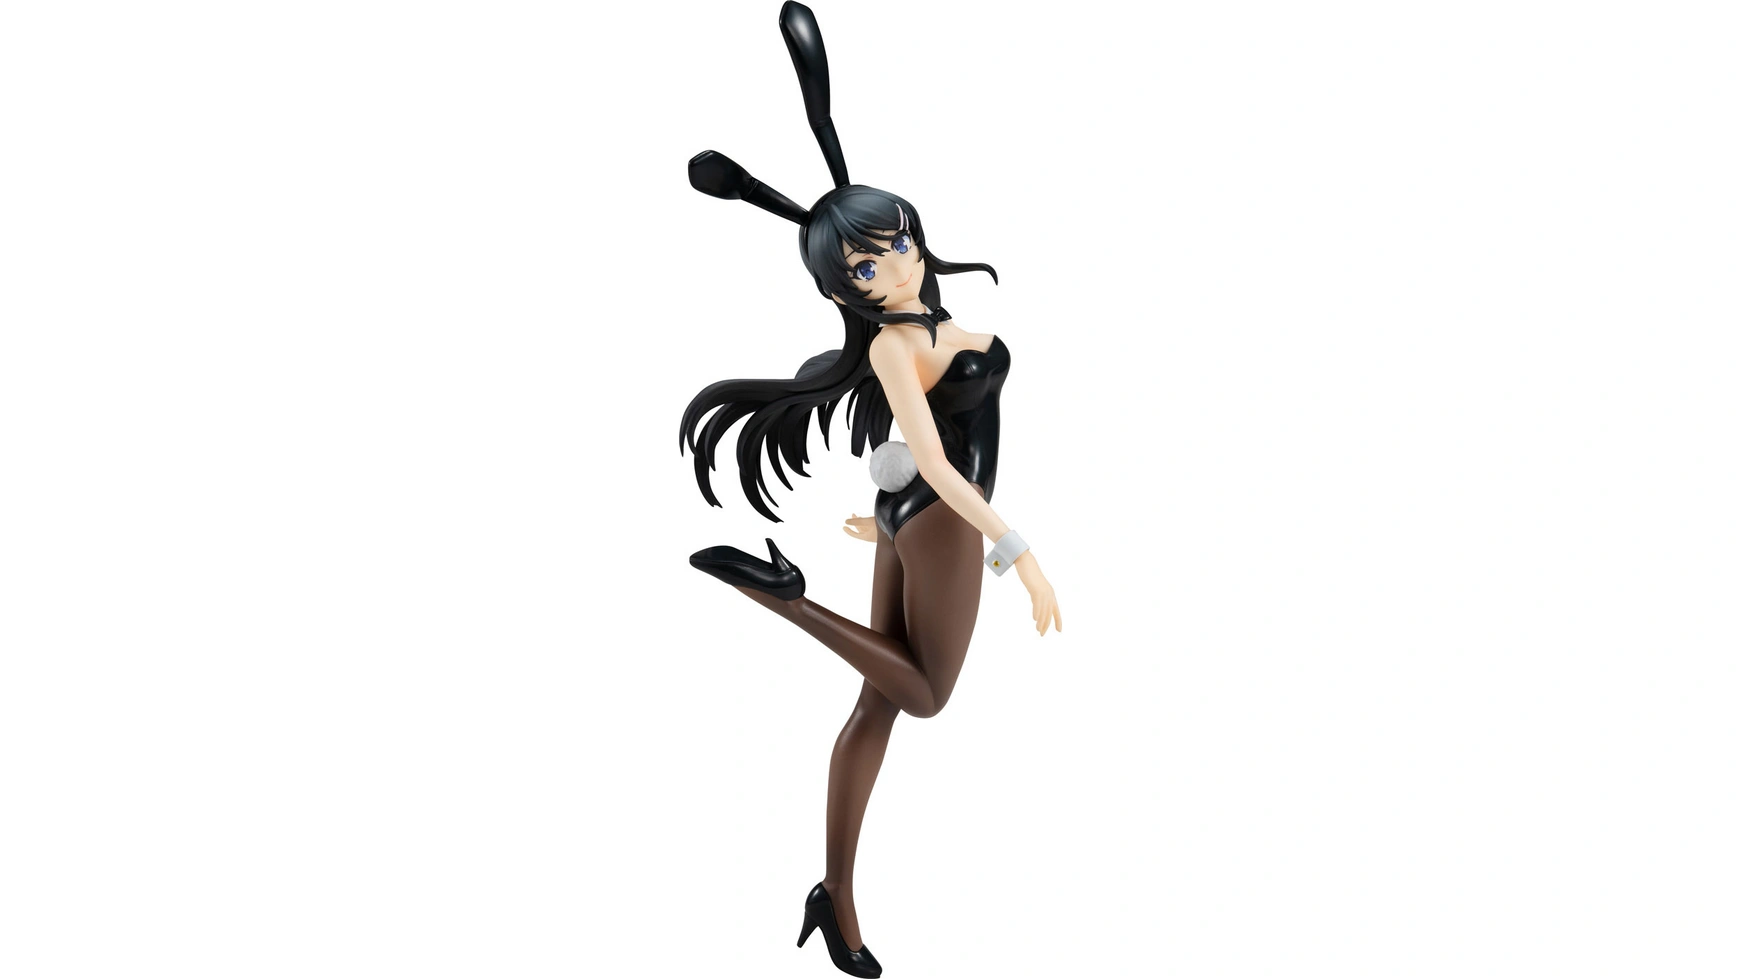 Rascal Does Not Dream Of Bunny Girl Senpai Pop Up Parade Статуя из ПВХ Май Сакурадзима 20 см 24cm anime rascal does not dream of bunny girl sakurajima mai action figure sexy girls pvc collection model dolls toys for gifts